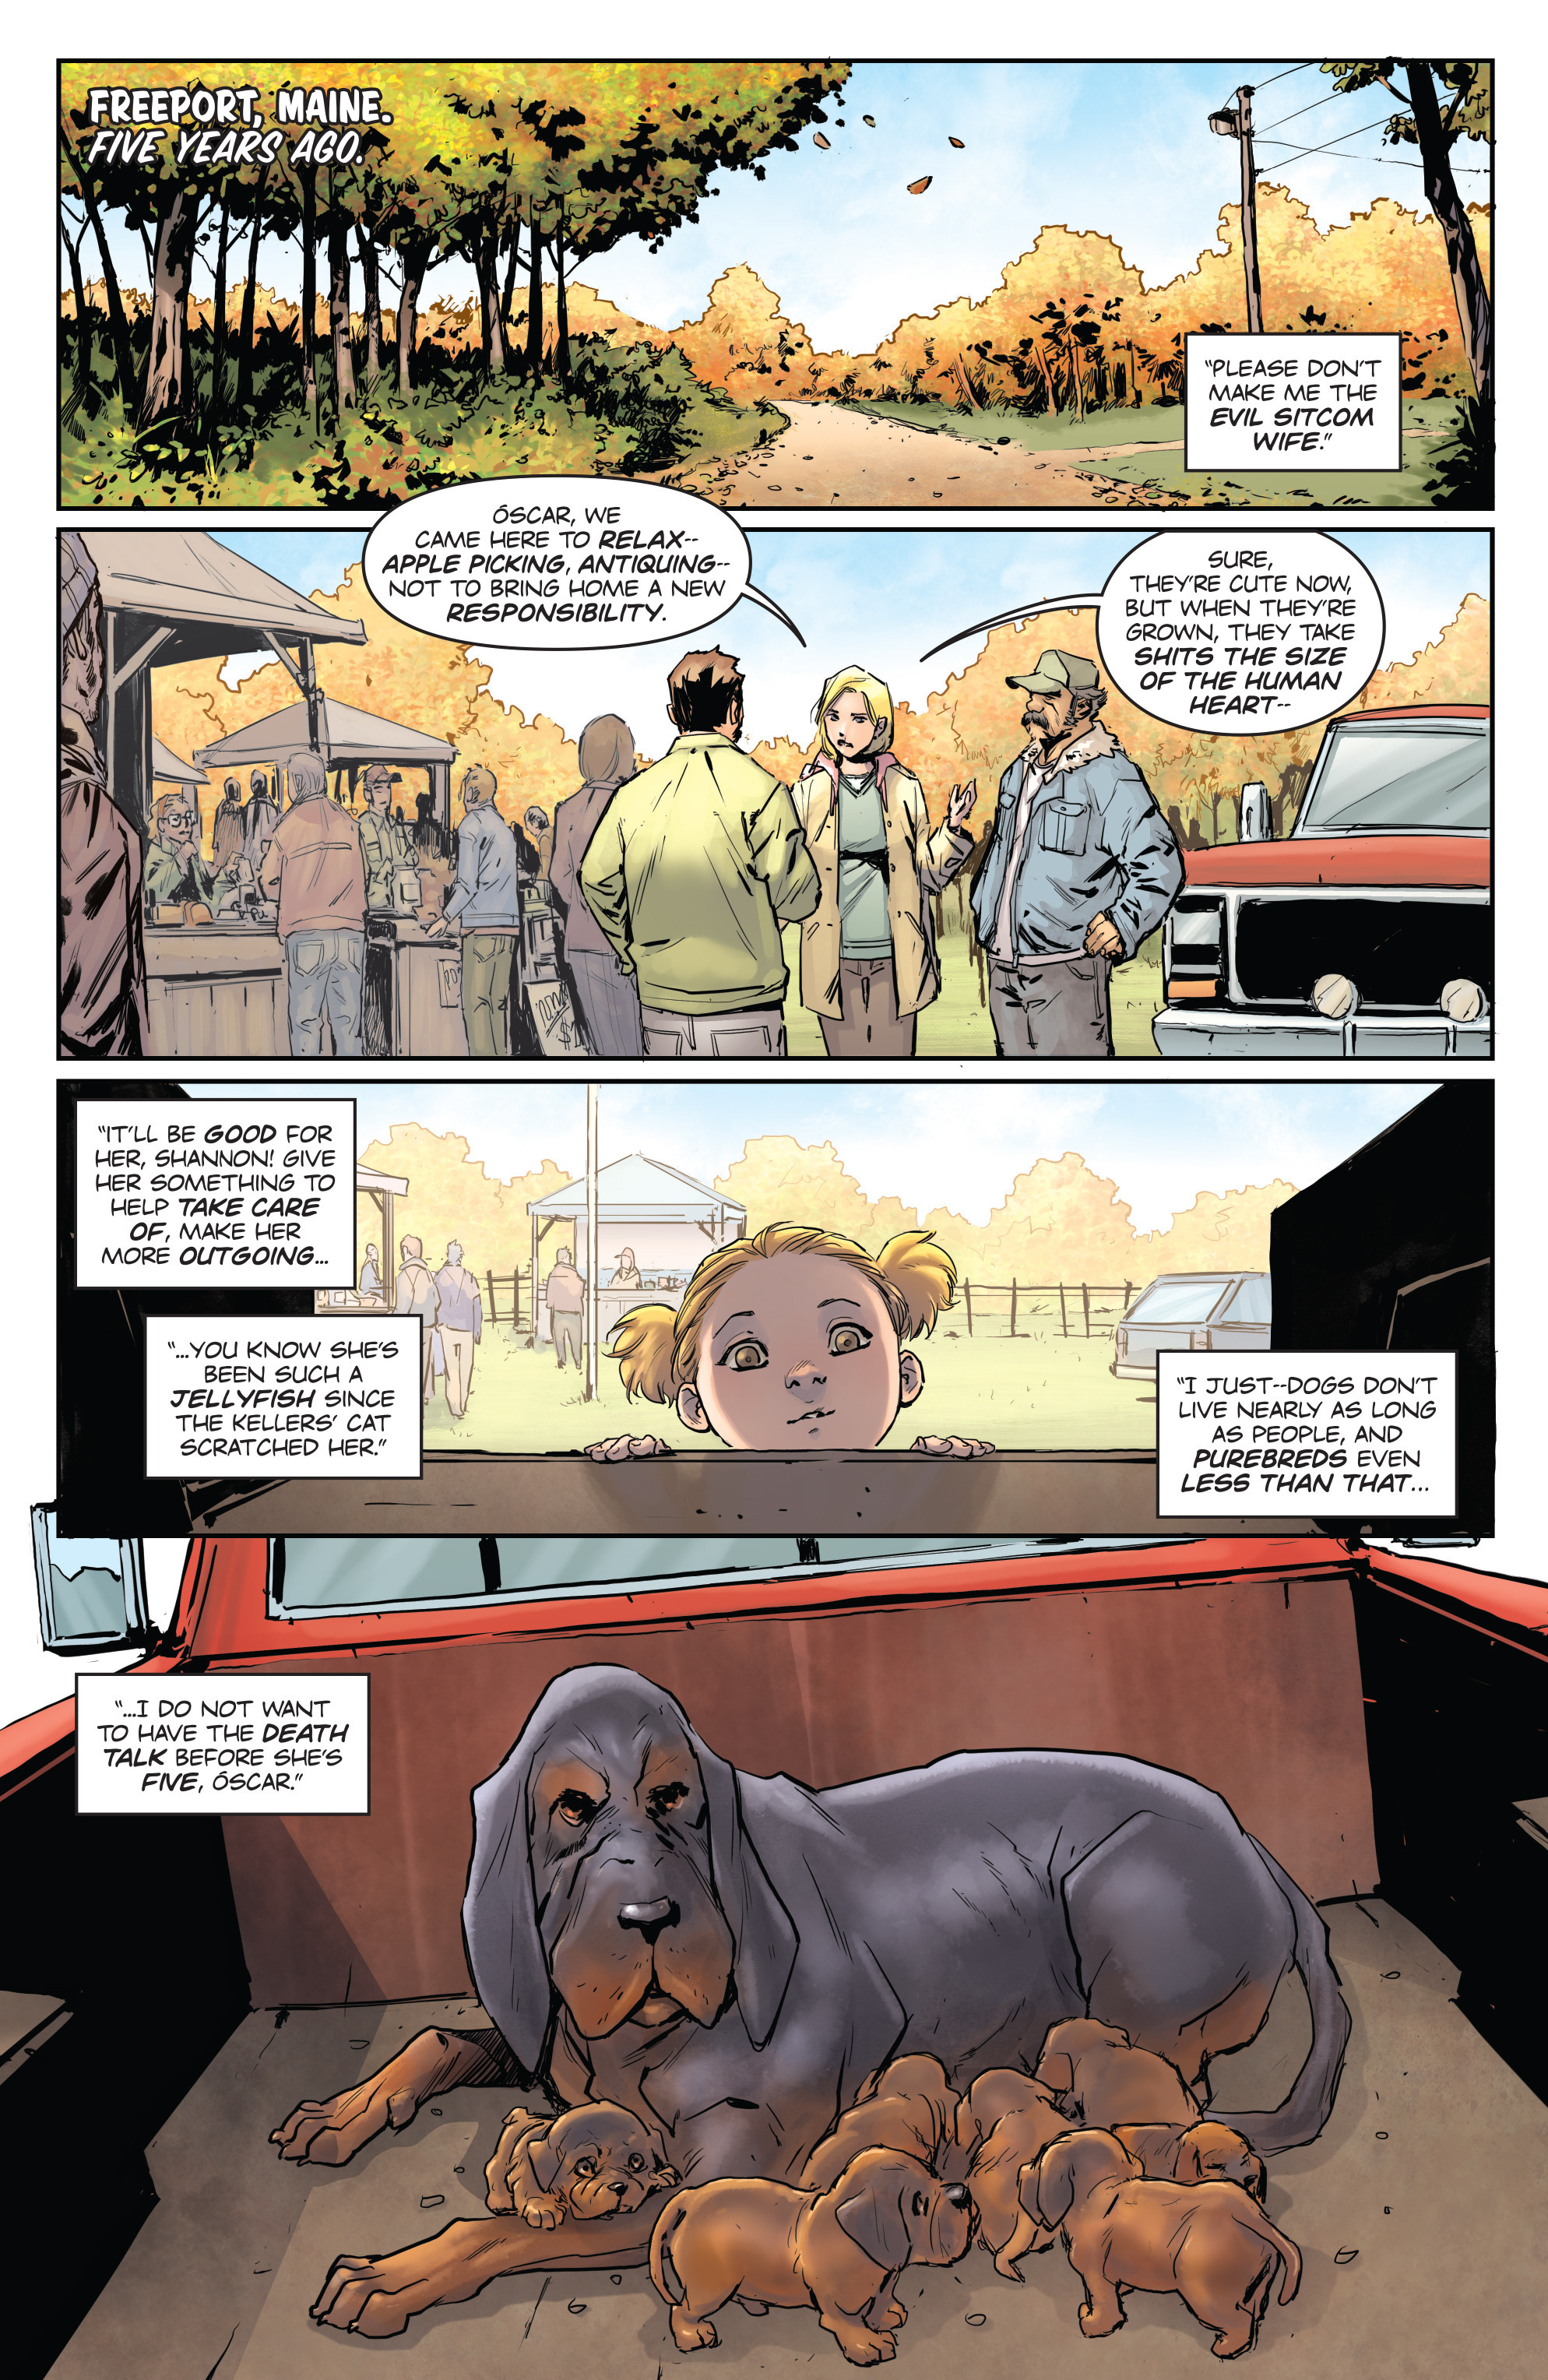 Animosity (2016-): Chapter 31 - Page 3